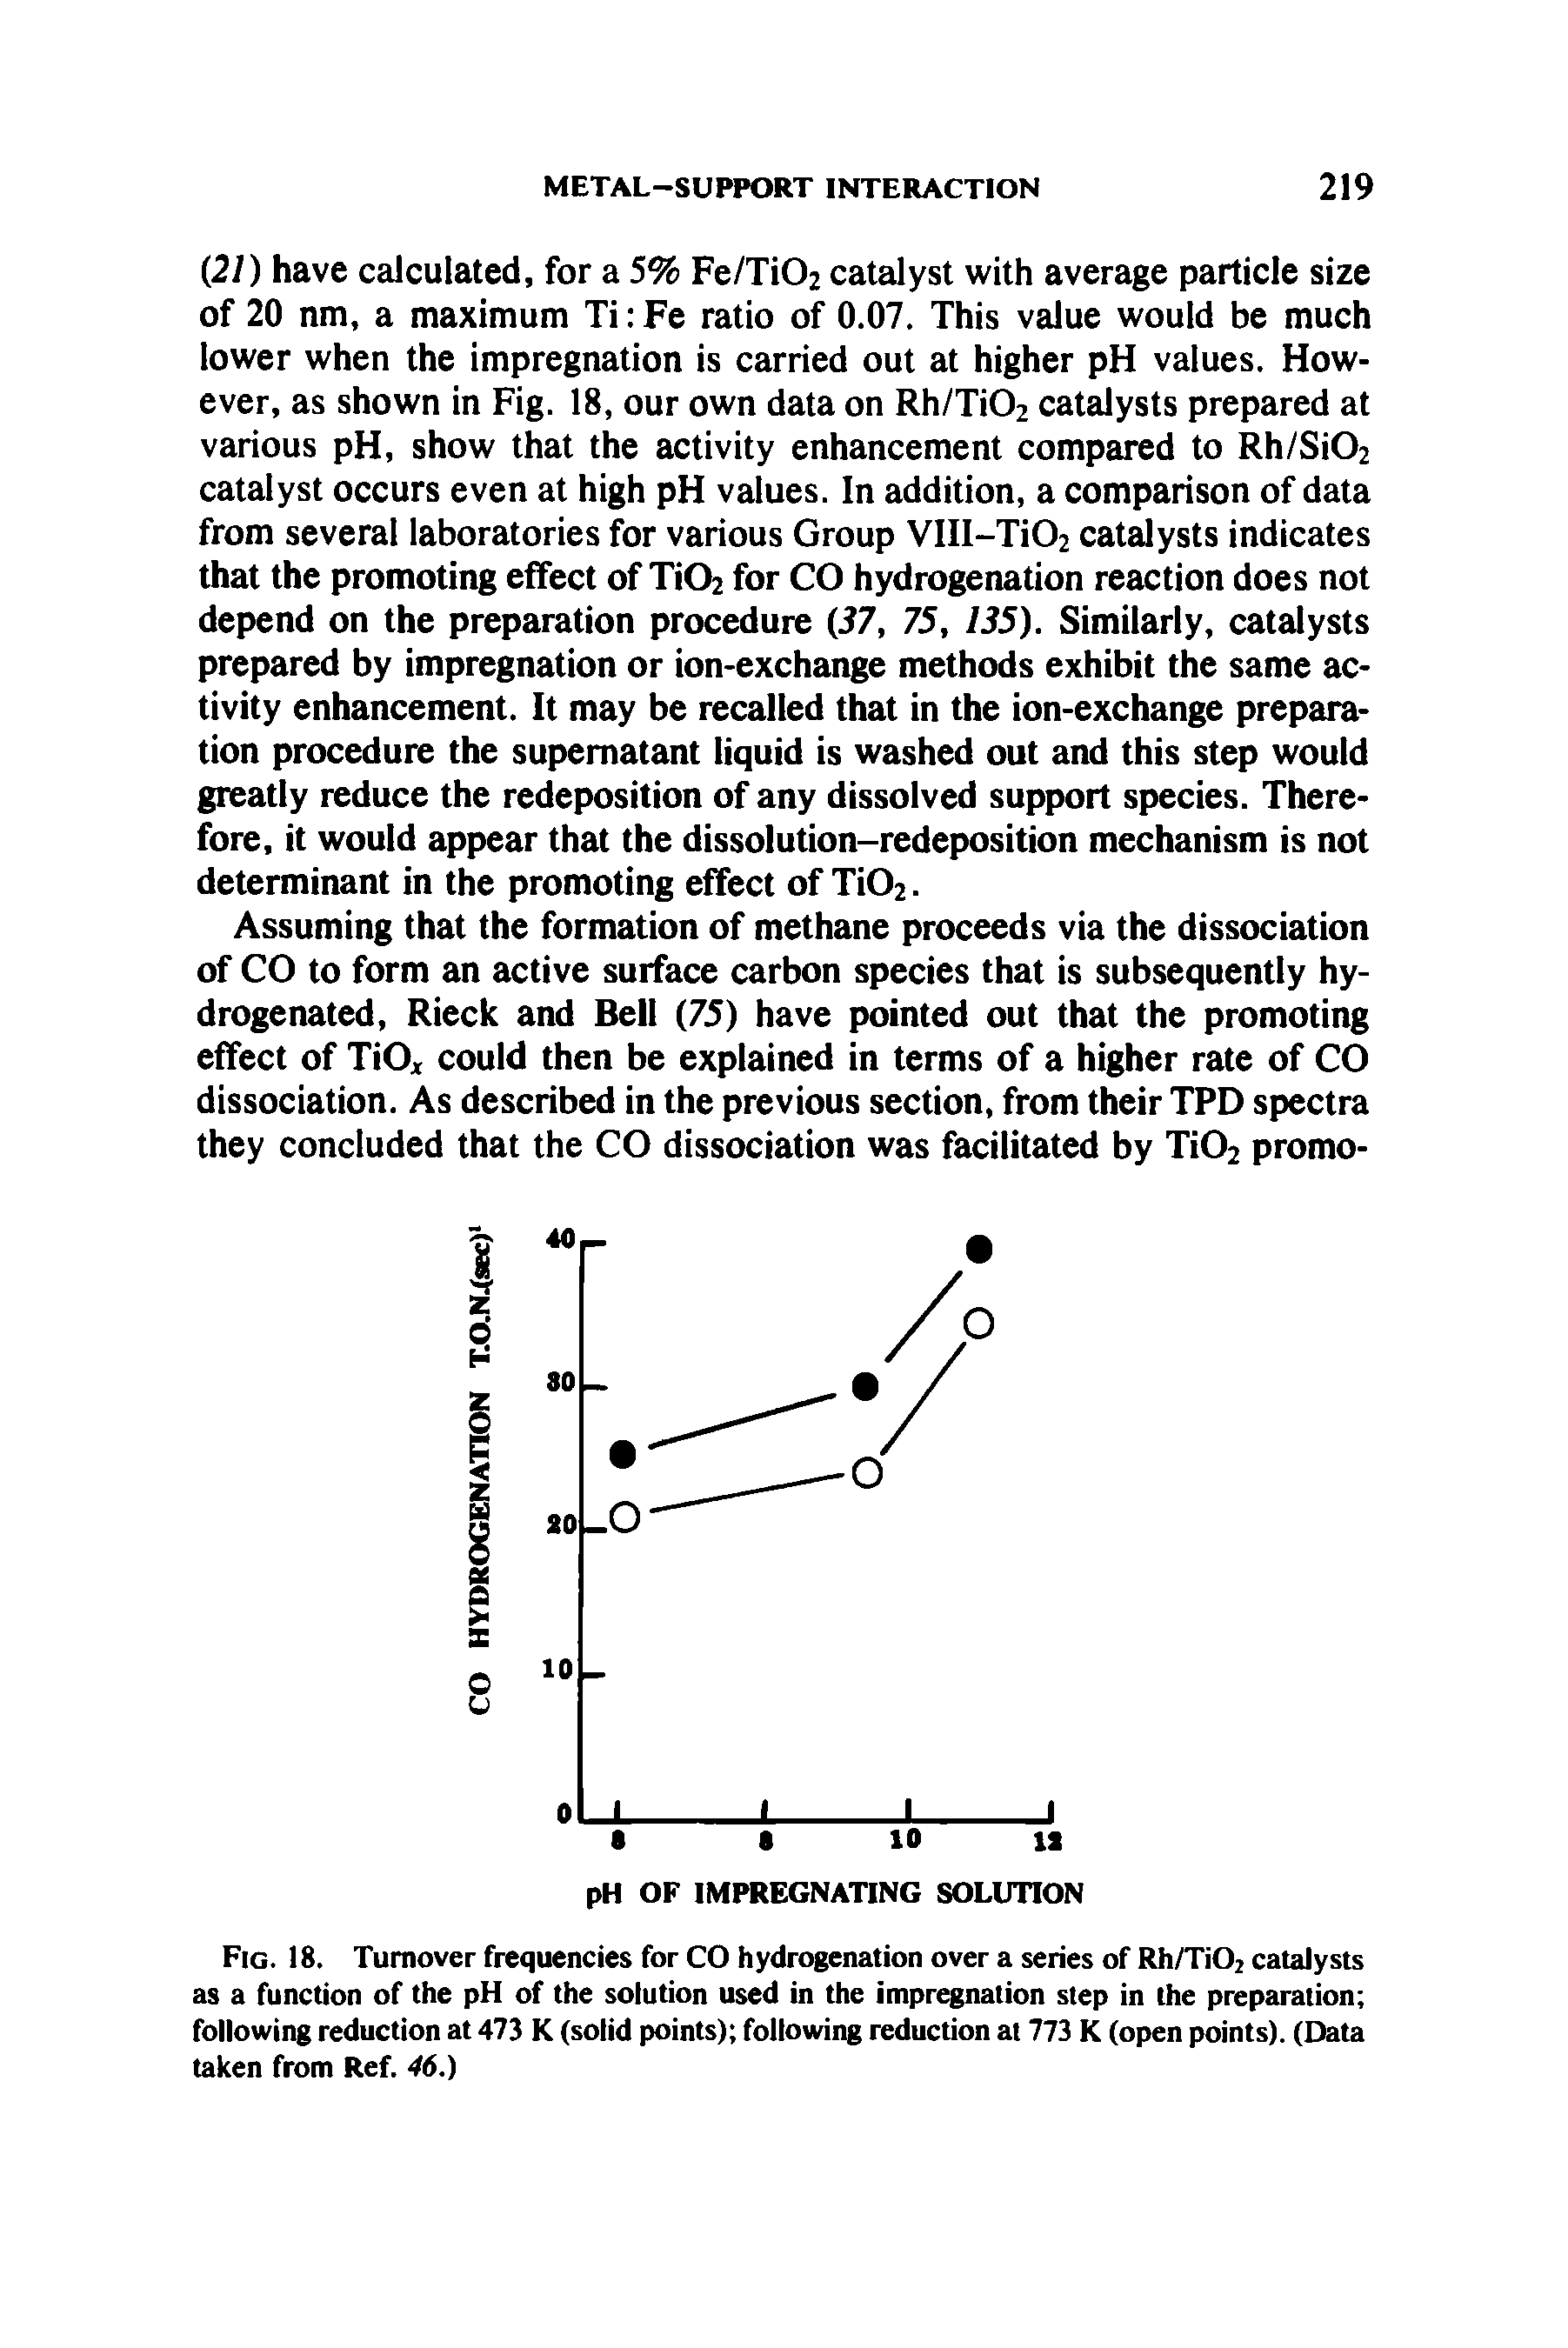 Fig. 18. Turnover frequencies for CO hydrogenation over a series of Rh/Ti02 catalysts as a function of the pH of the solution used in the impregnation step in the preparation following reduction at 473 K (solid points) following reduction at 773 K (open points). (Data taken from Ref. 46.)...